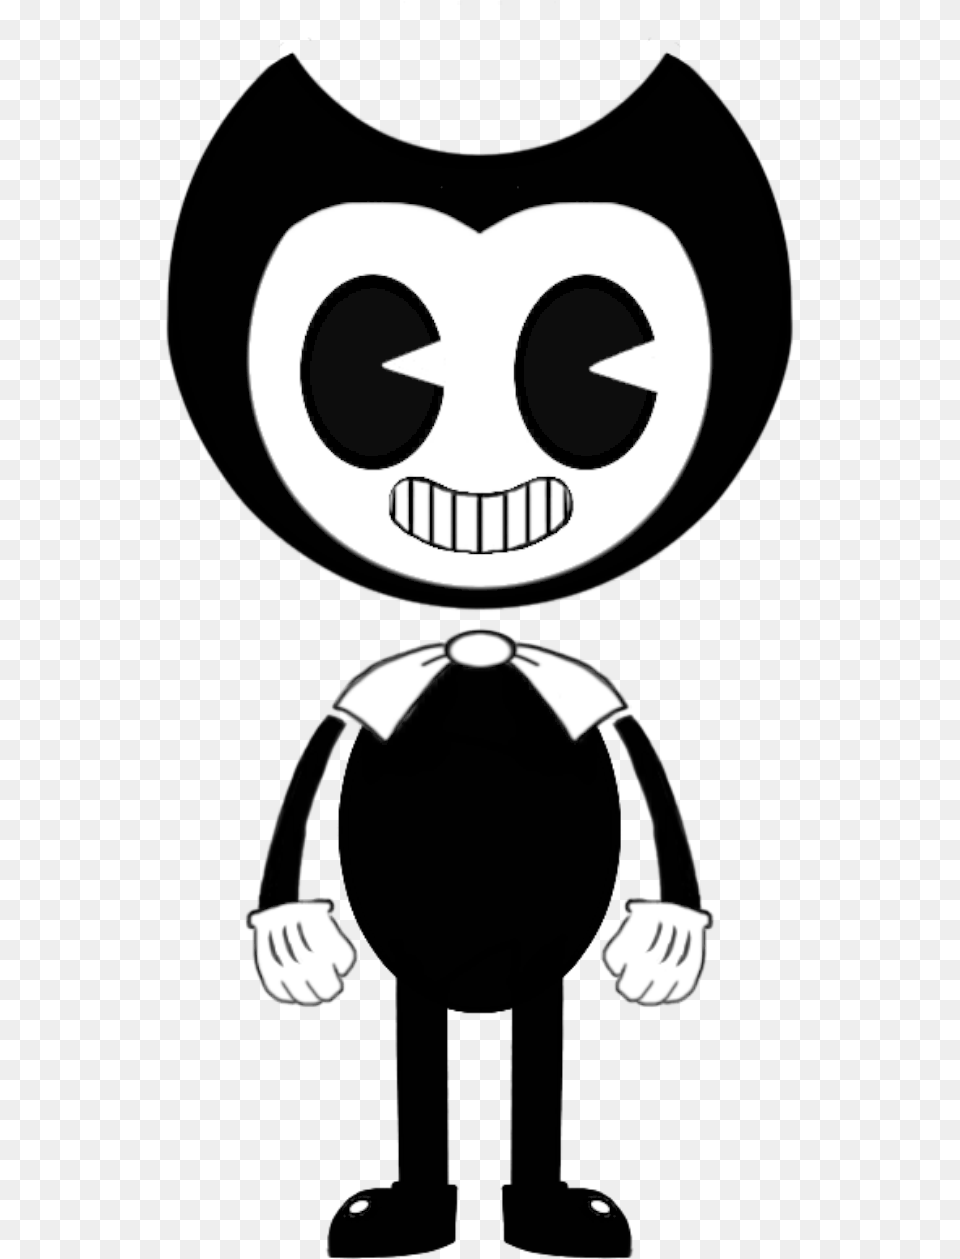 Bendy And The Ink Machine Bendy Black, Stencil, Logo Png Image